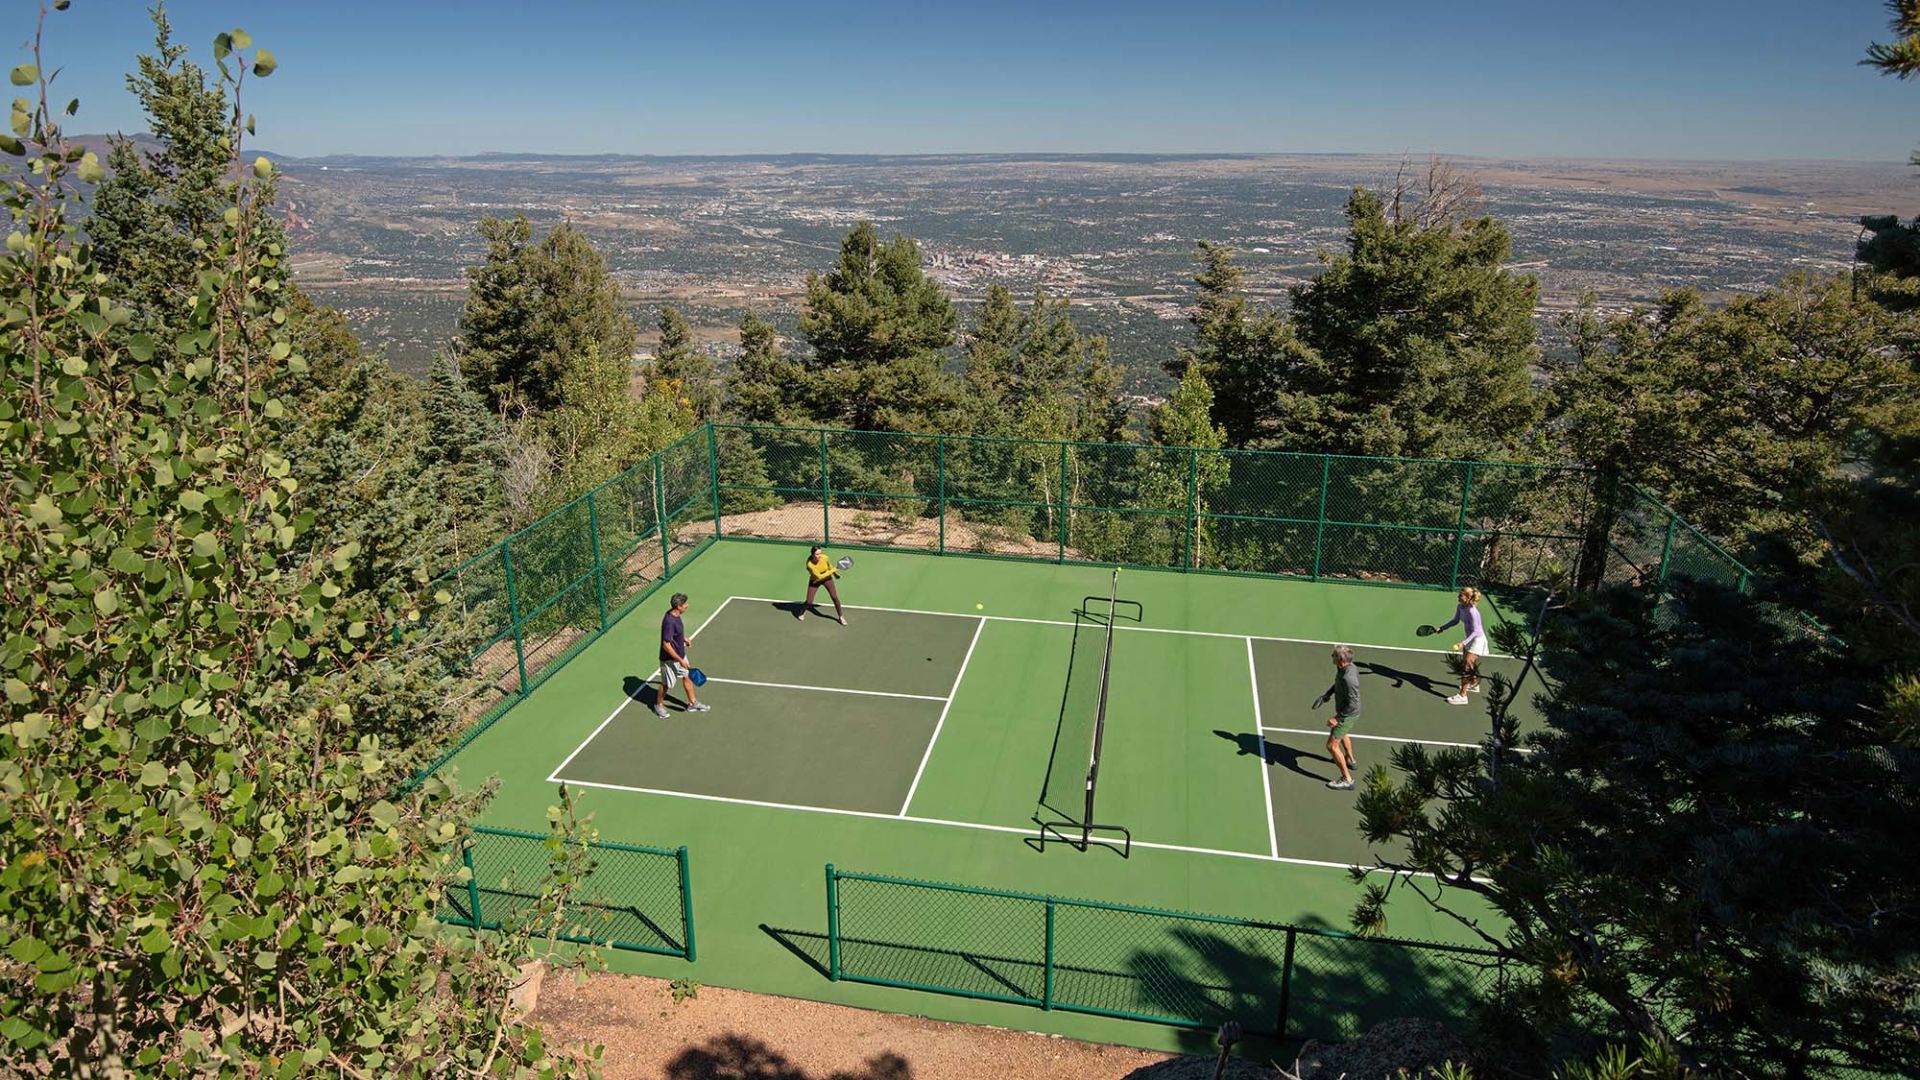 A Group Of People Playing Tennis